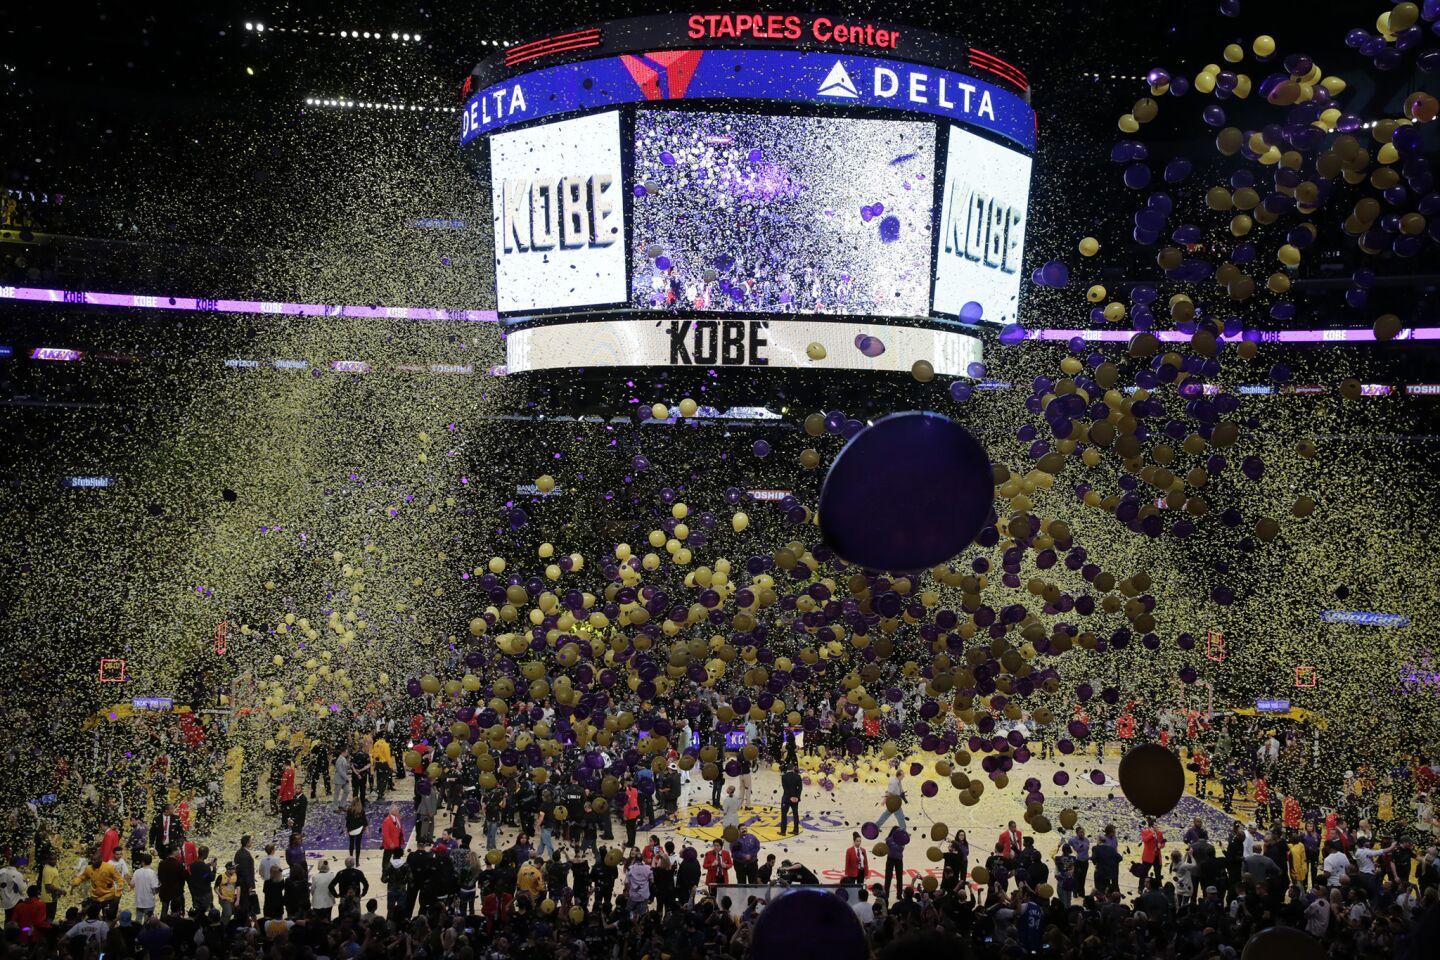 Balloons and confetti fall after Kobe Bryant's last game